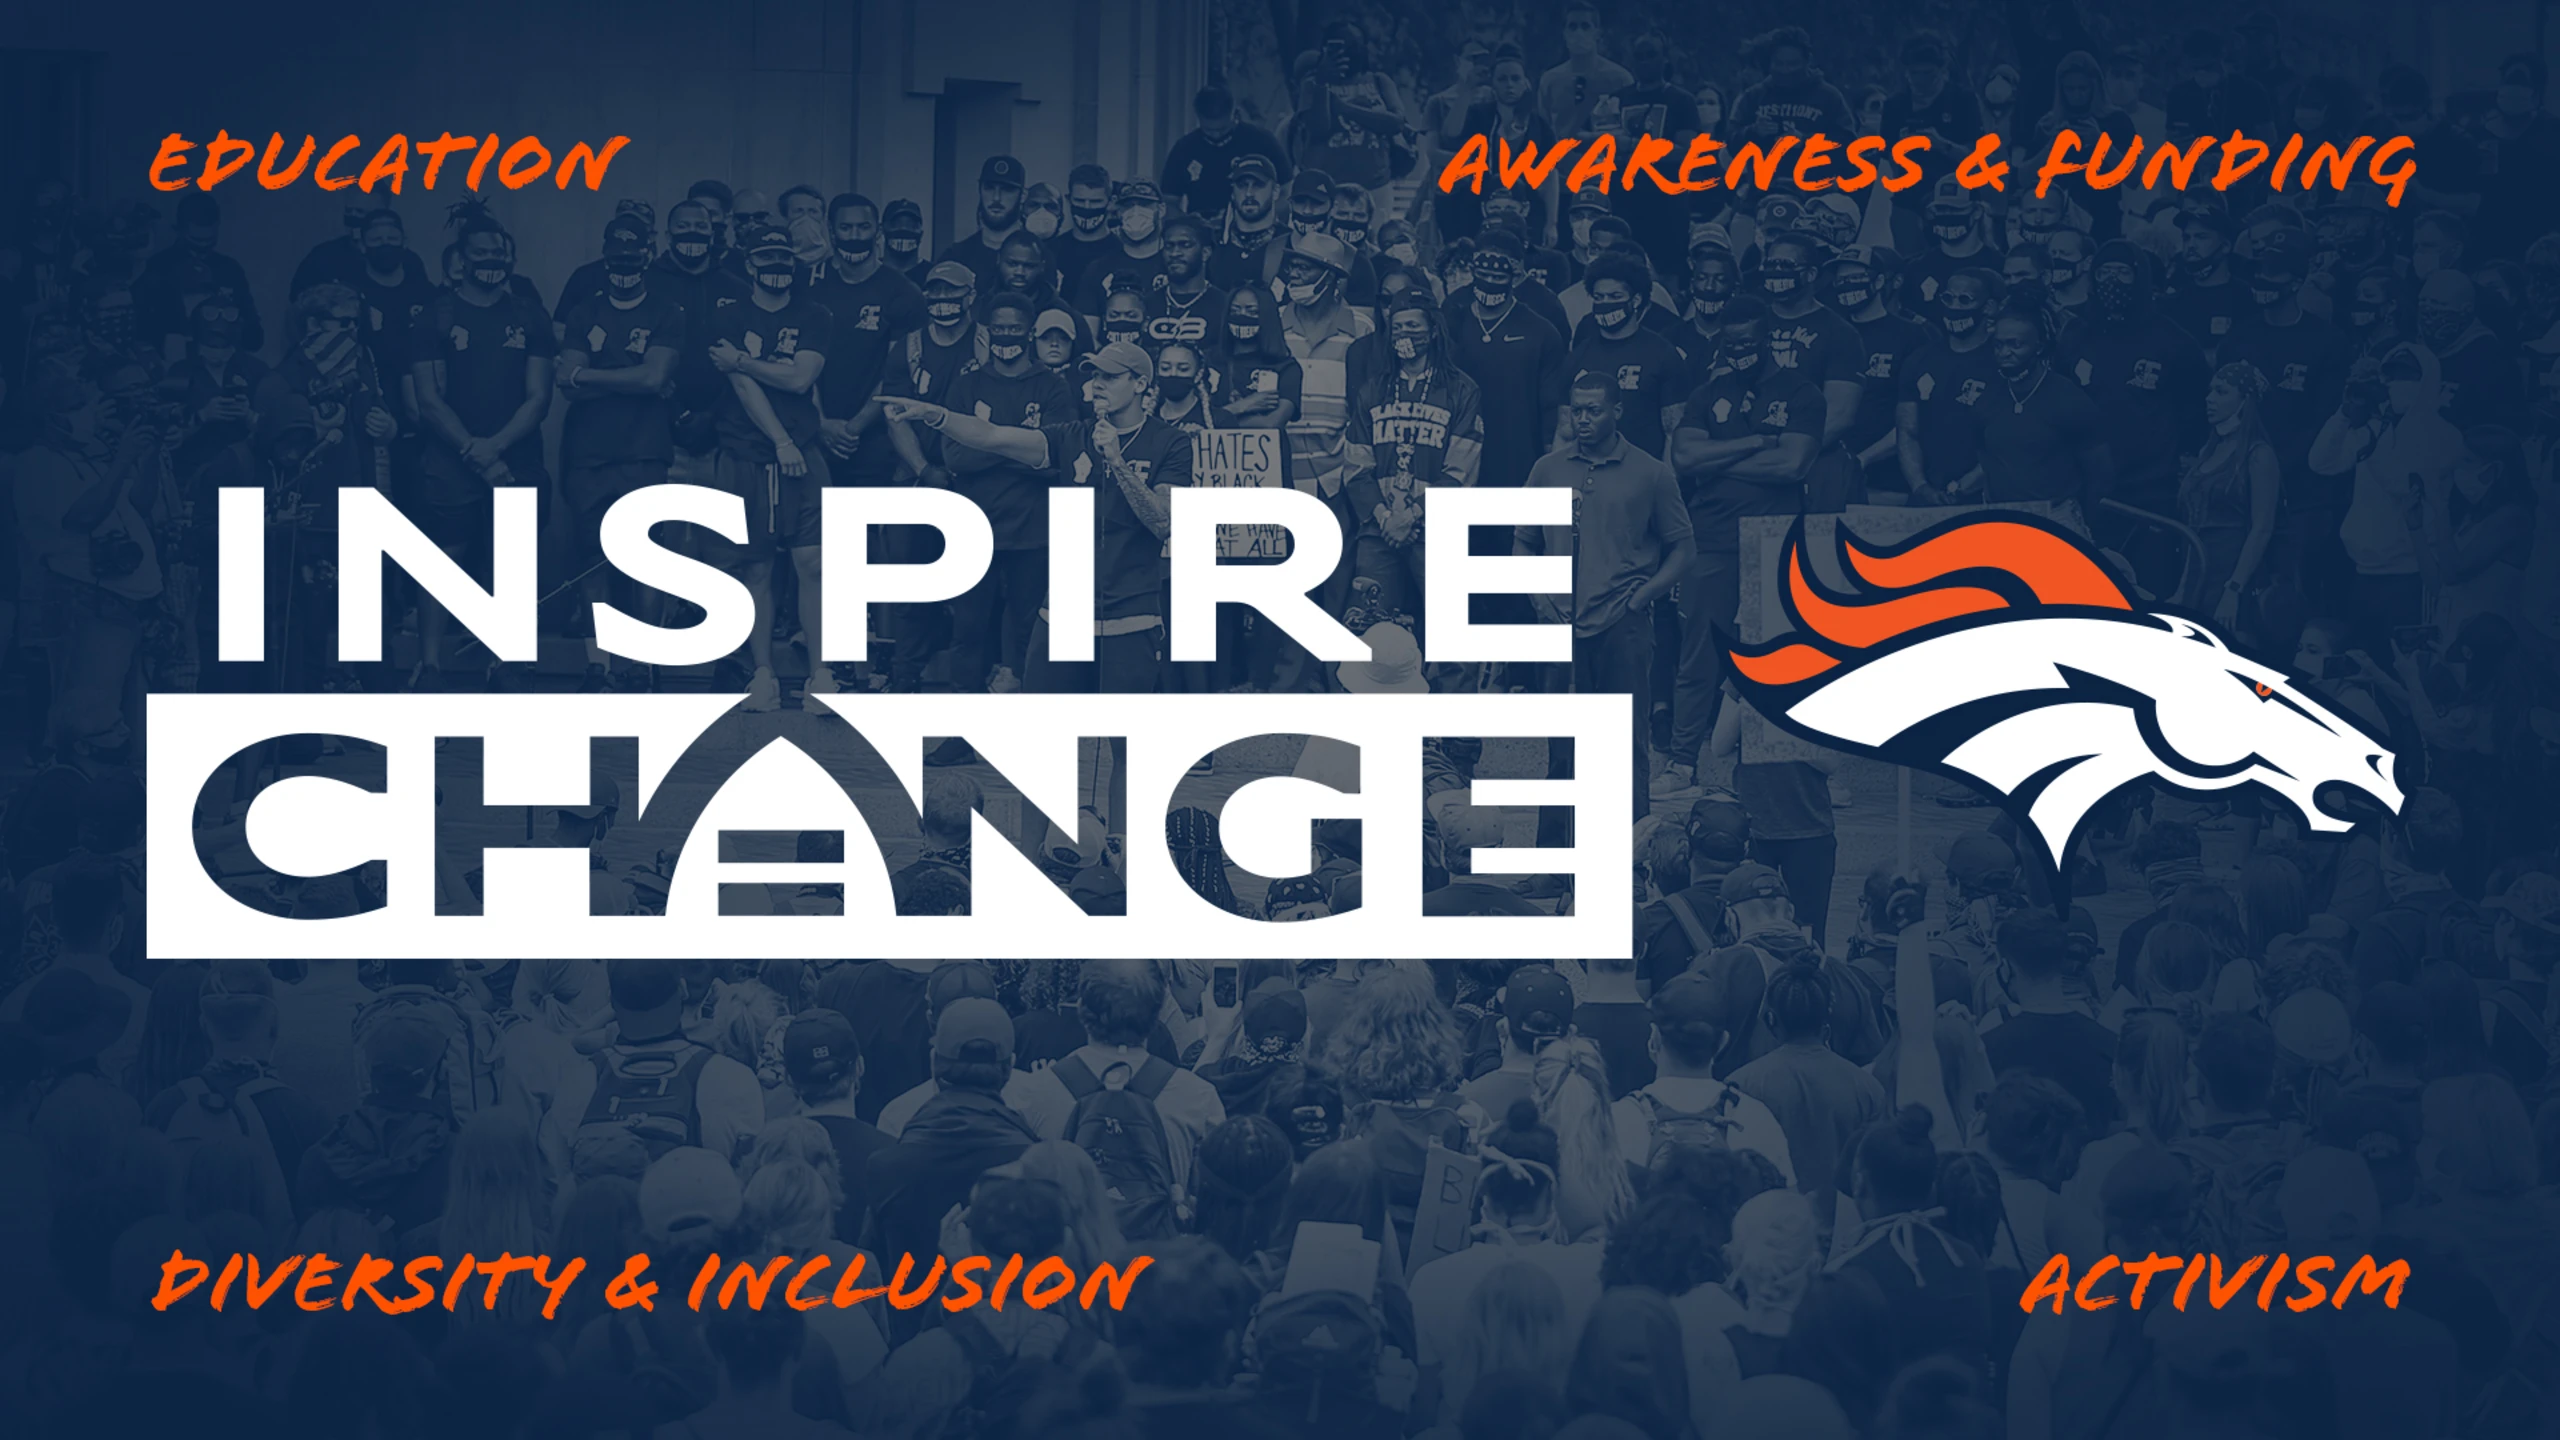 Broncos players participate in 2020 My Cause My Cleats initiative to raise  awareness and funds for various causes and non-profit organizations